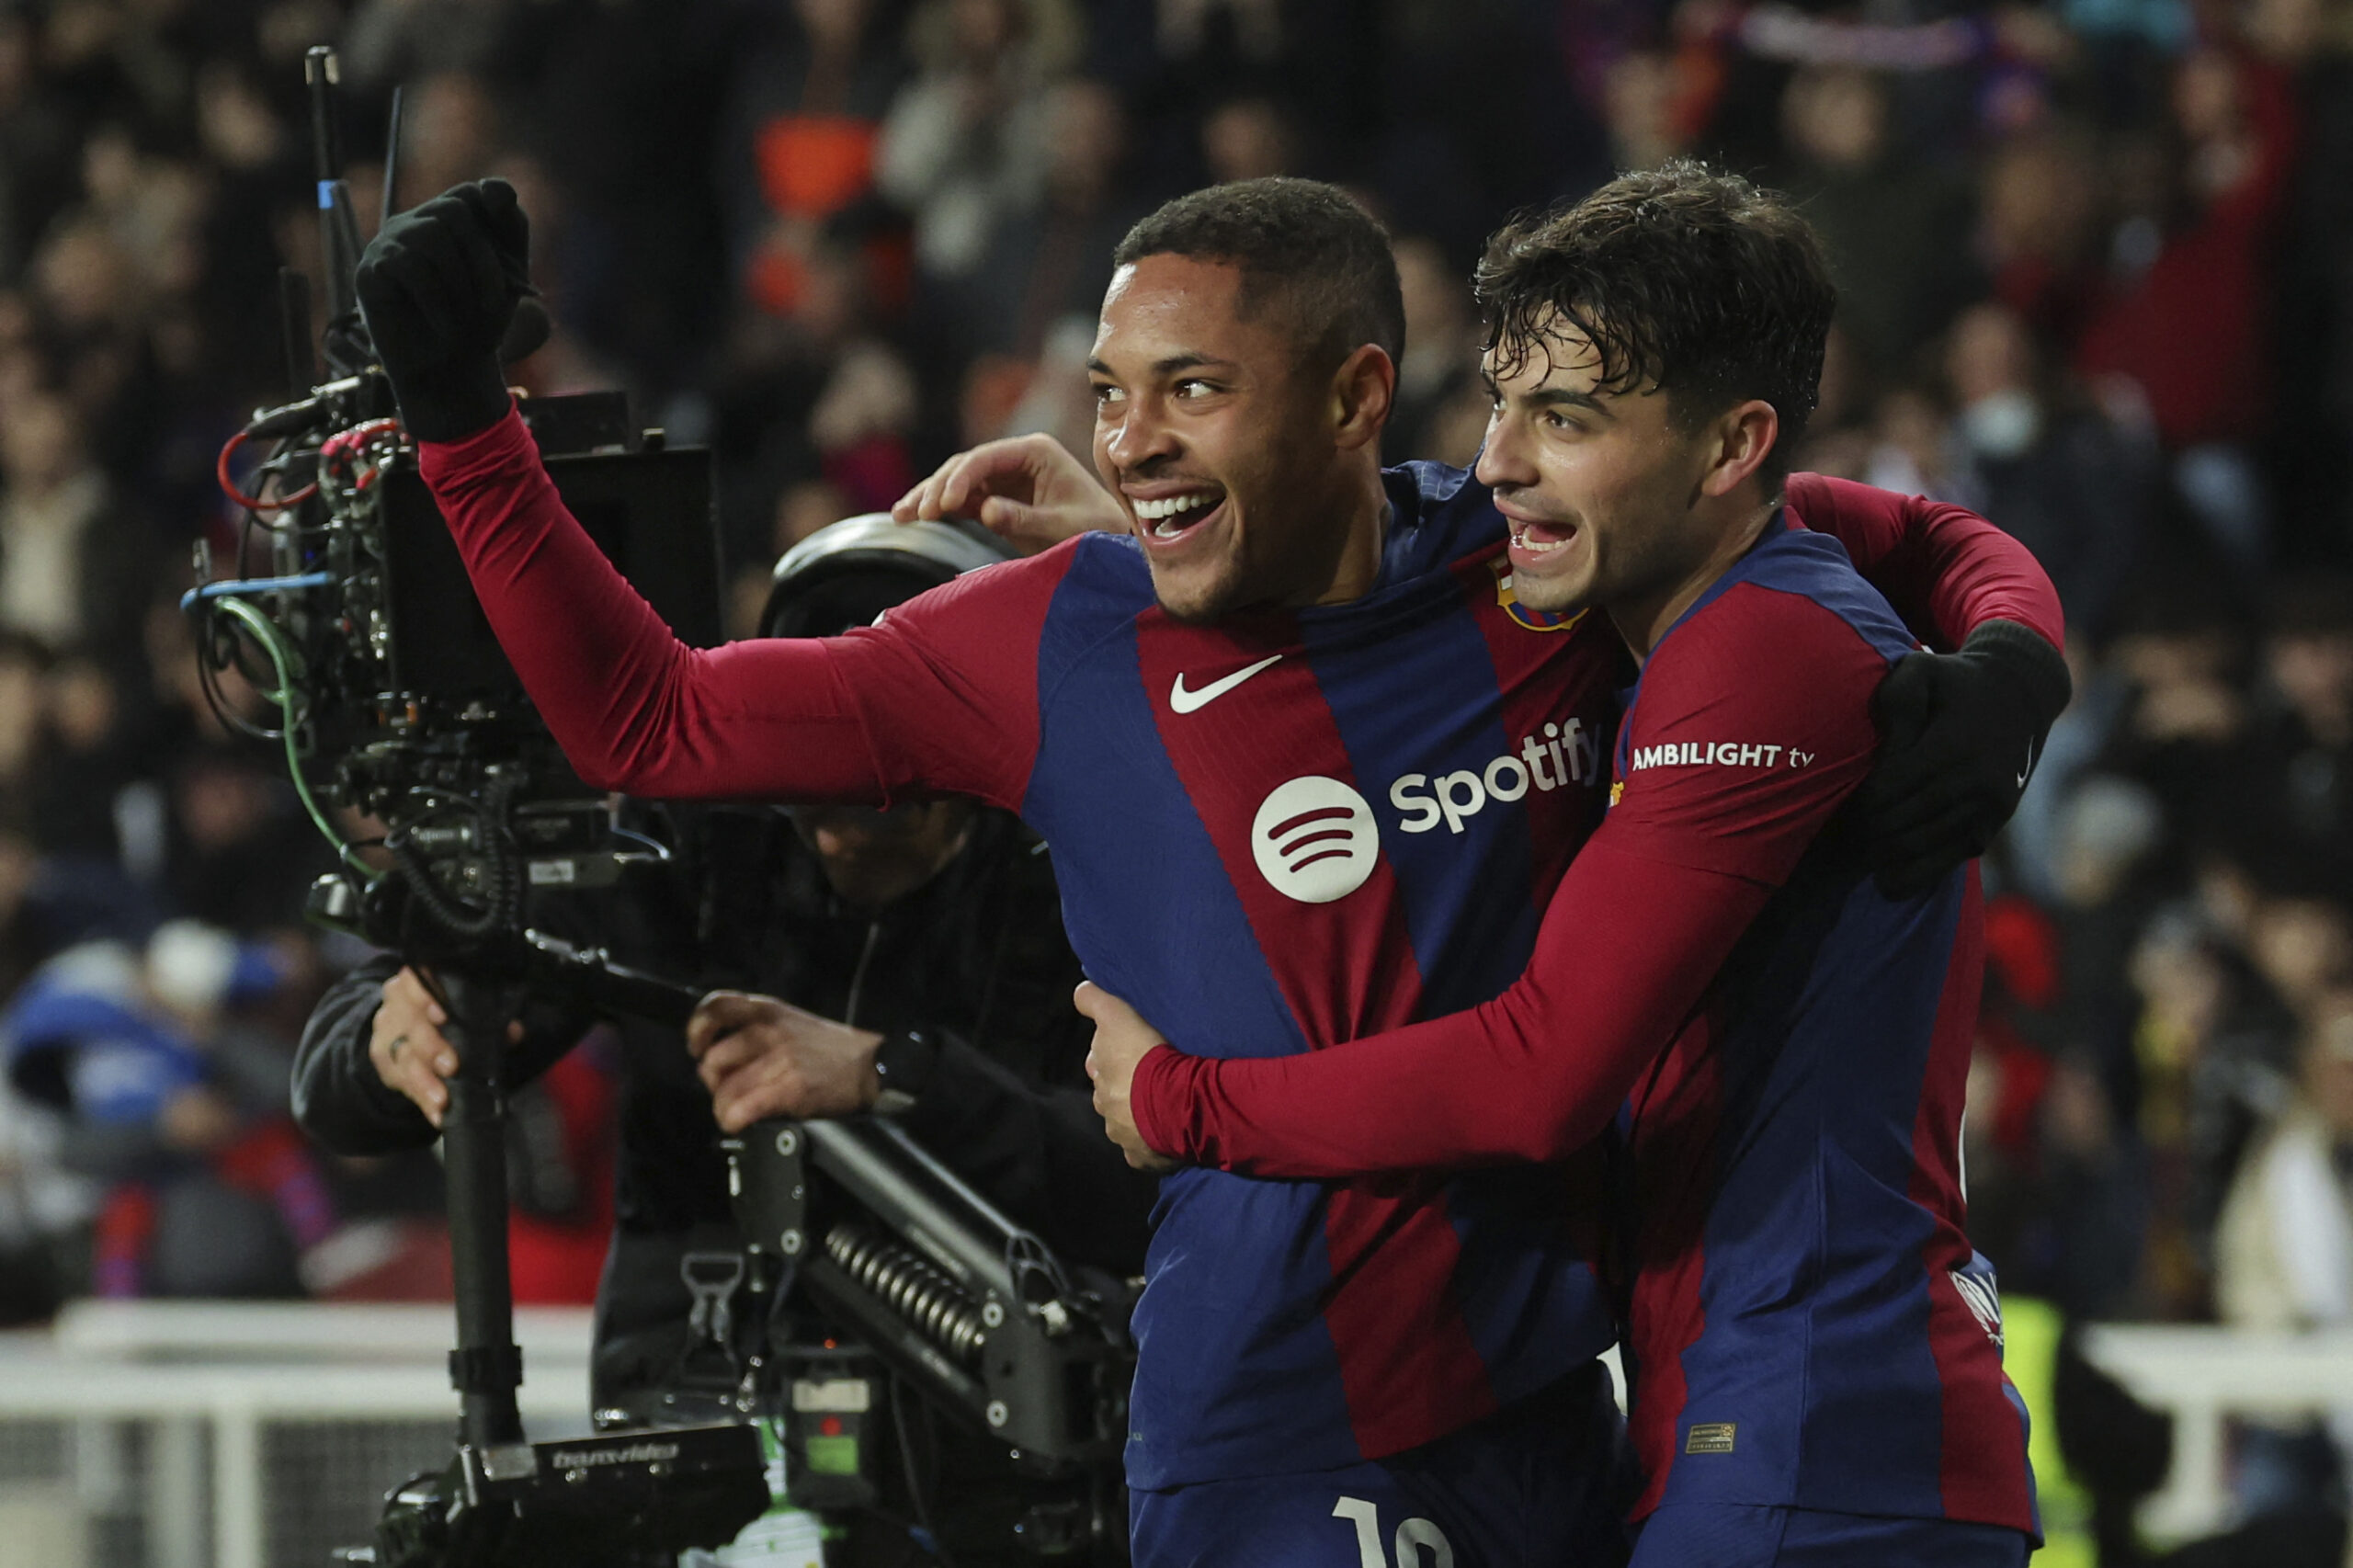 Barcelona's Brazilian forward #19 Vitor Roque (L) celebrates scoring the opening goal, with Barcelona's Spanish midfielder #08 Pedri, during the Spanish league football match between FC Barcelona and CA Osasuna at the Estadi Olimpic Lluis Companys in Barcelona on January 31, 2024.